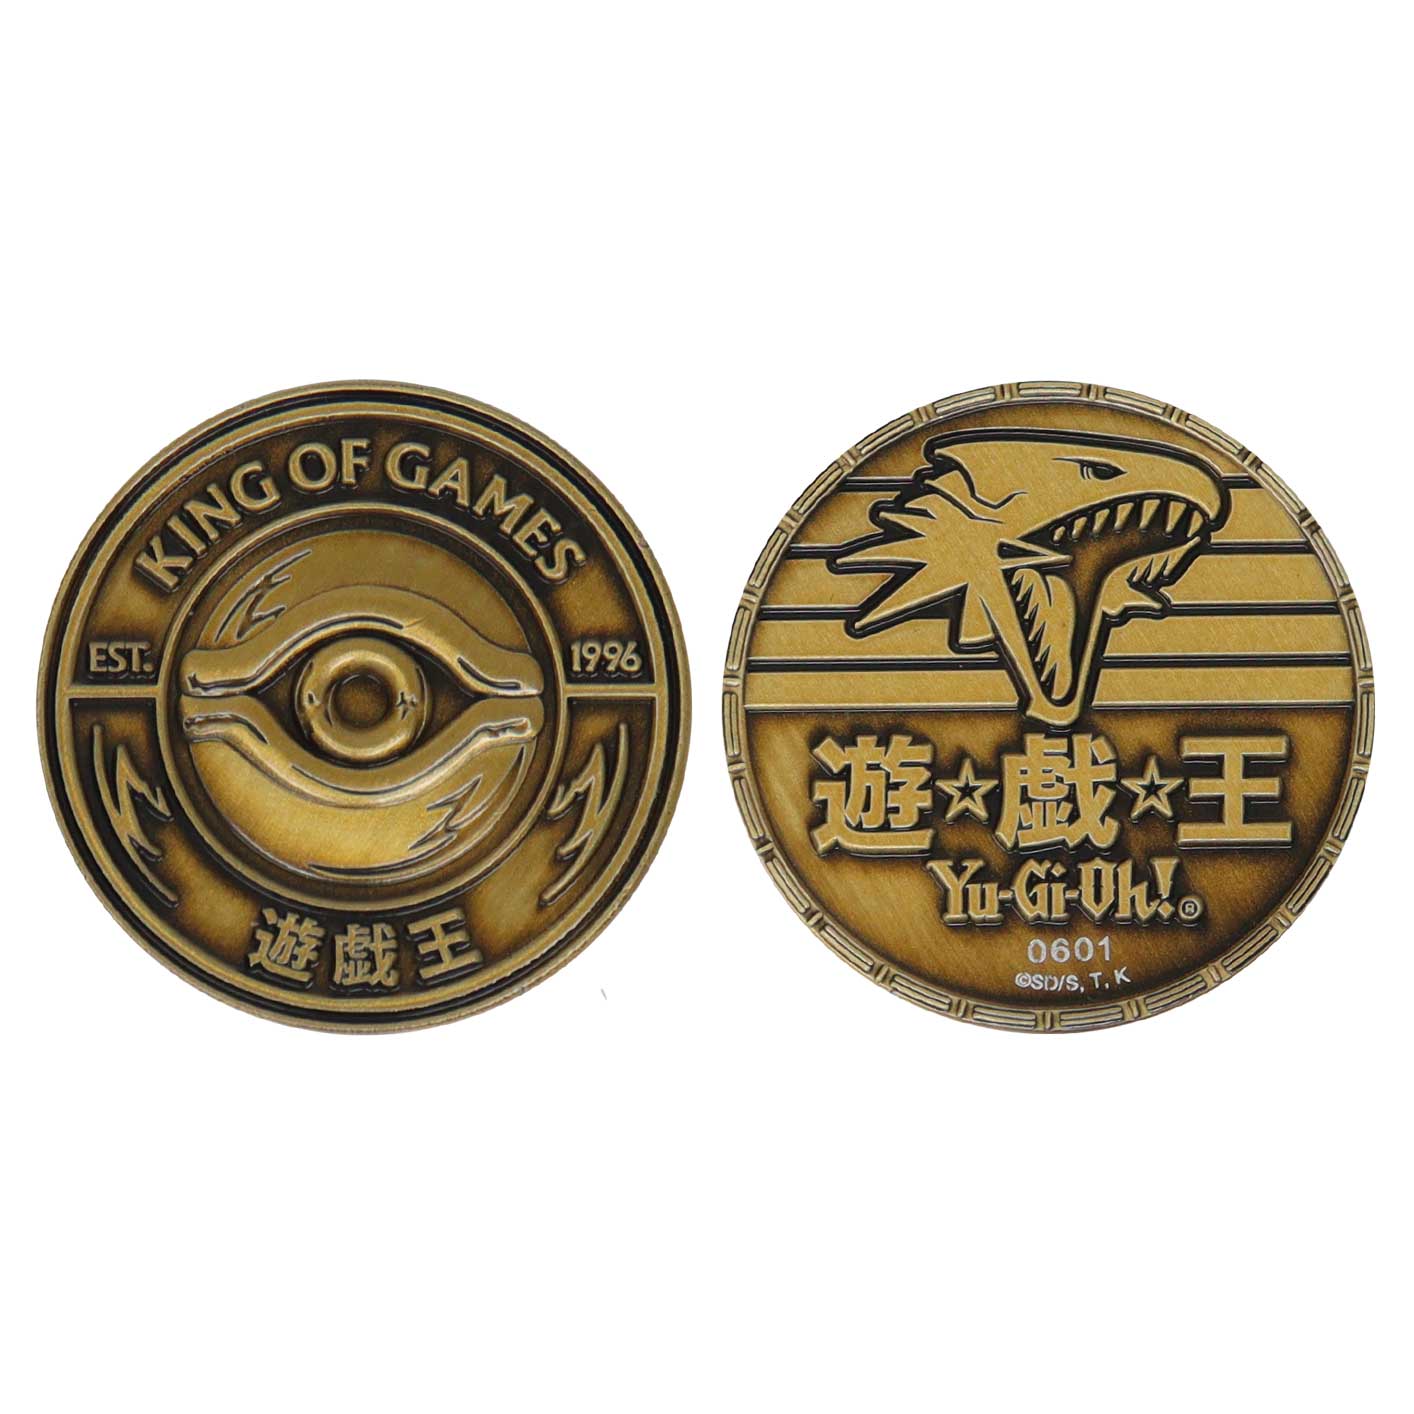 Yu-Gi-Oh! Limited Edition King of Games Collectible Coin